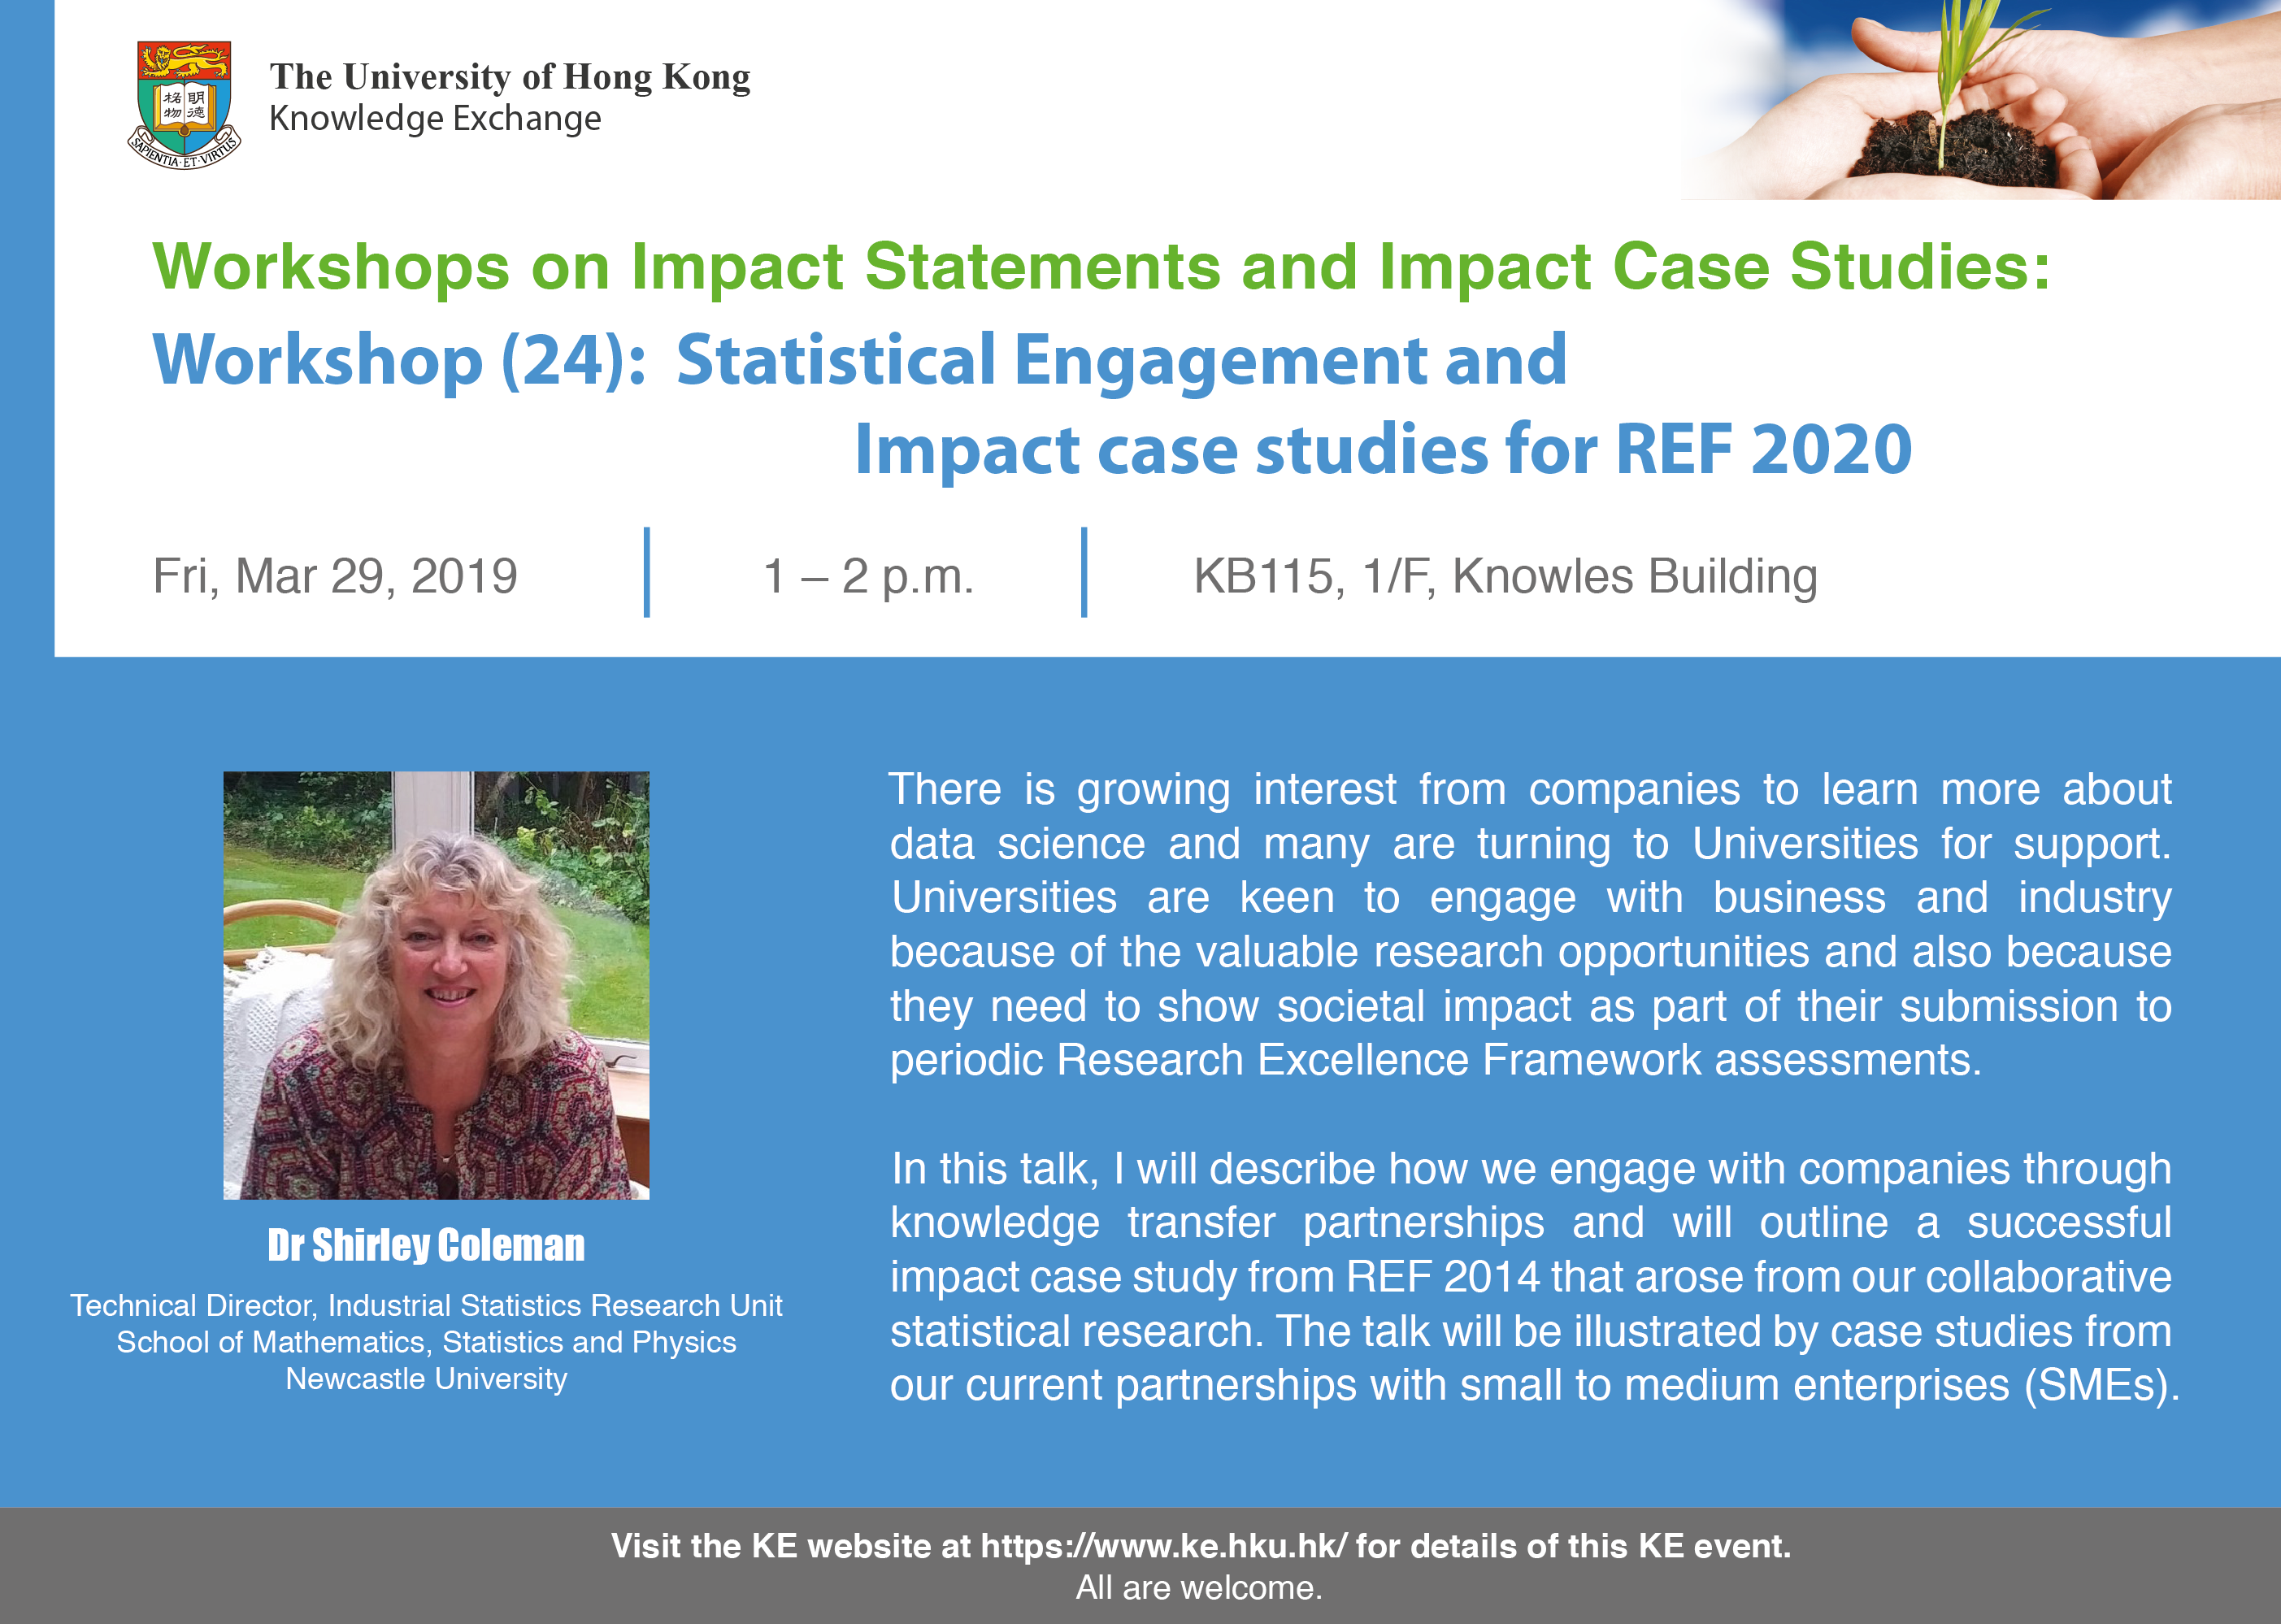 Statistical Engagement and Impact case studies for REF 2020